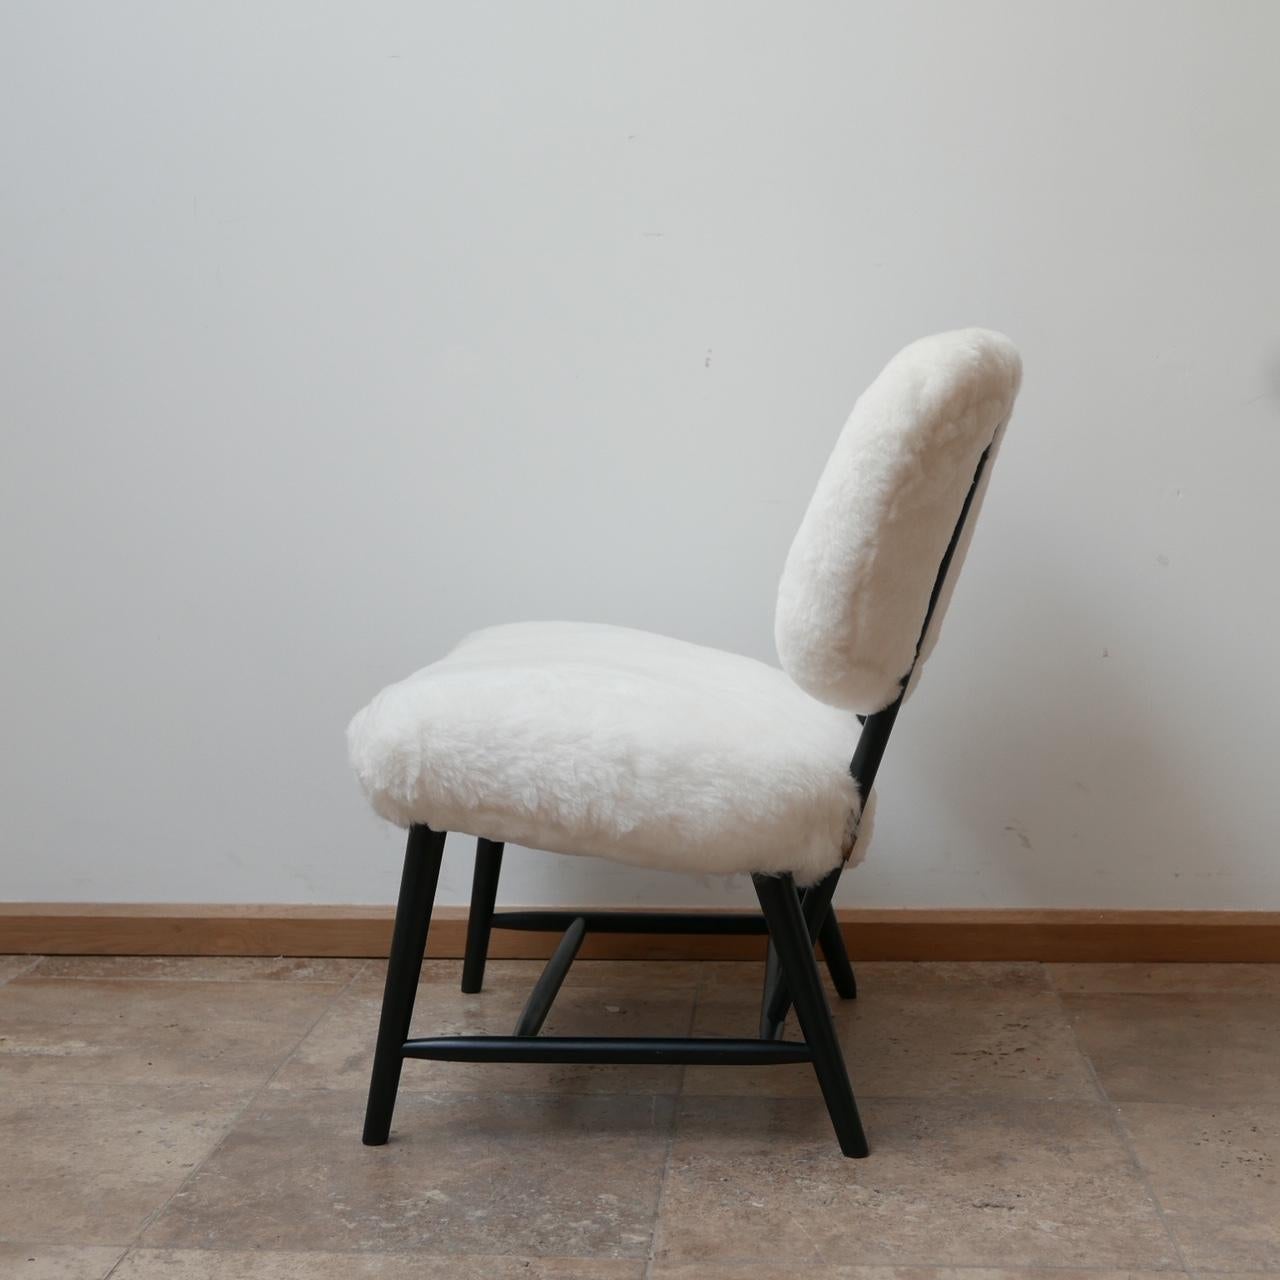 Pair of Alf Svensson 'TeVe' Sheepskin Shearling Lounge Chairs For Sale 4